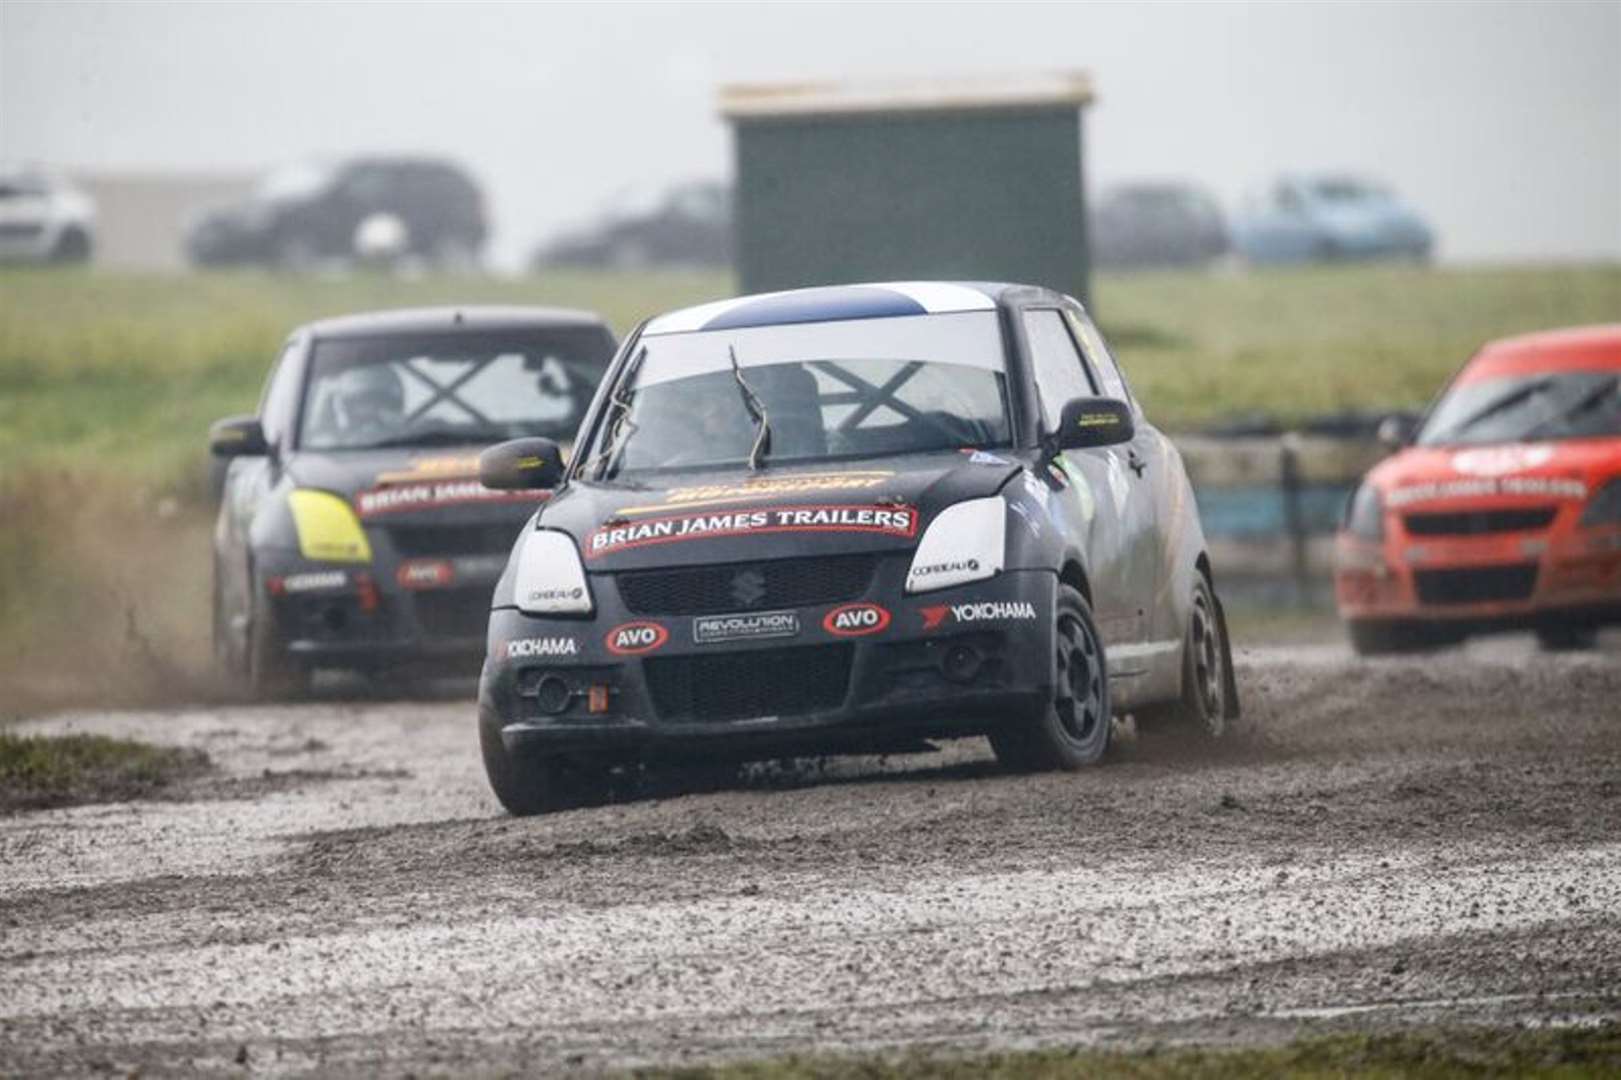 Don Macleod races this weekend at Lydden Hill